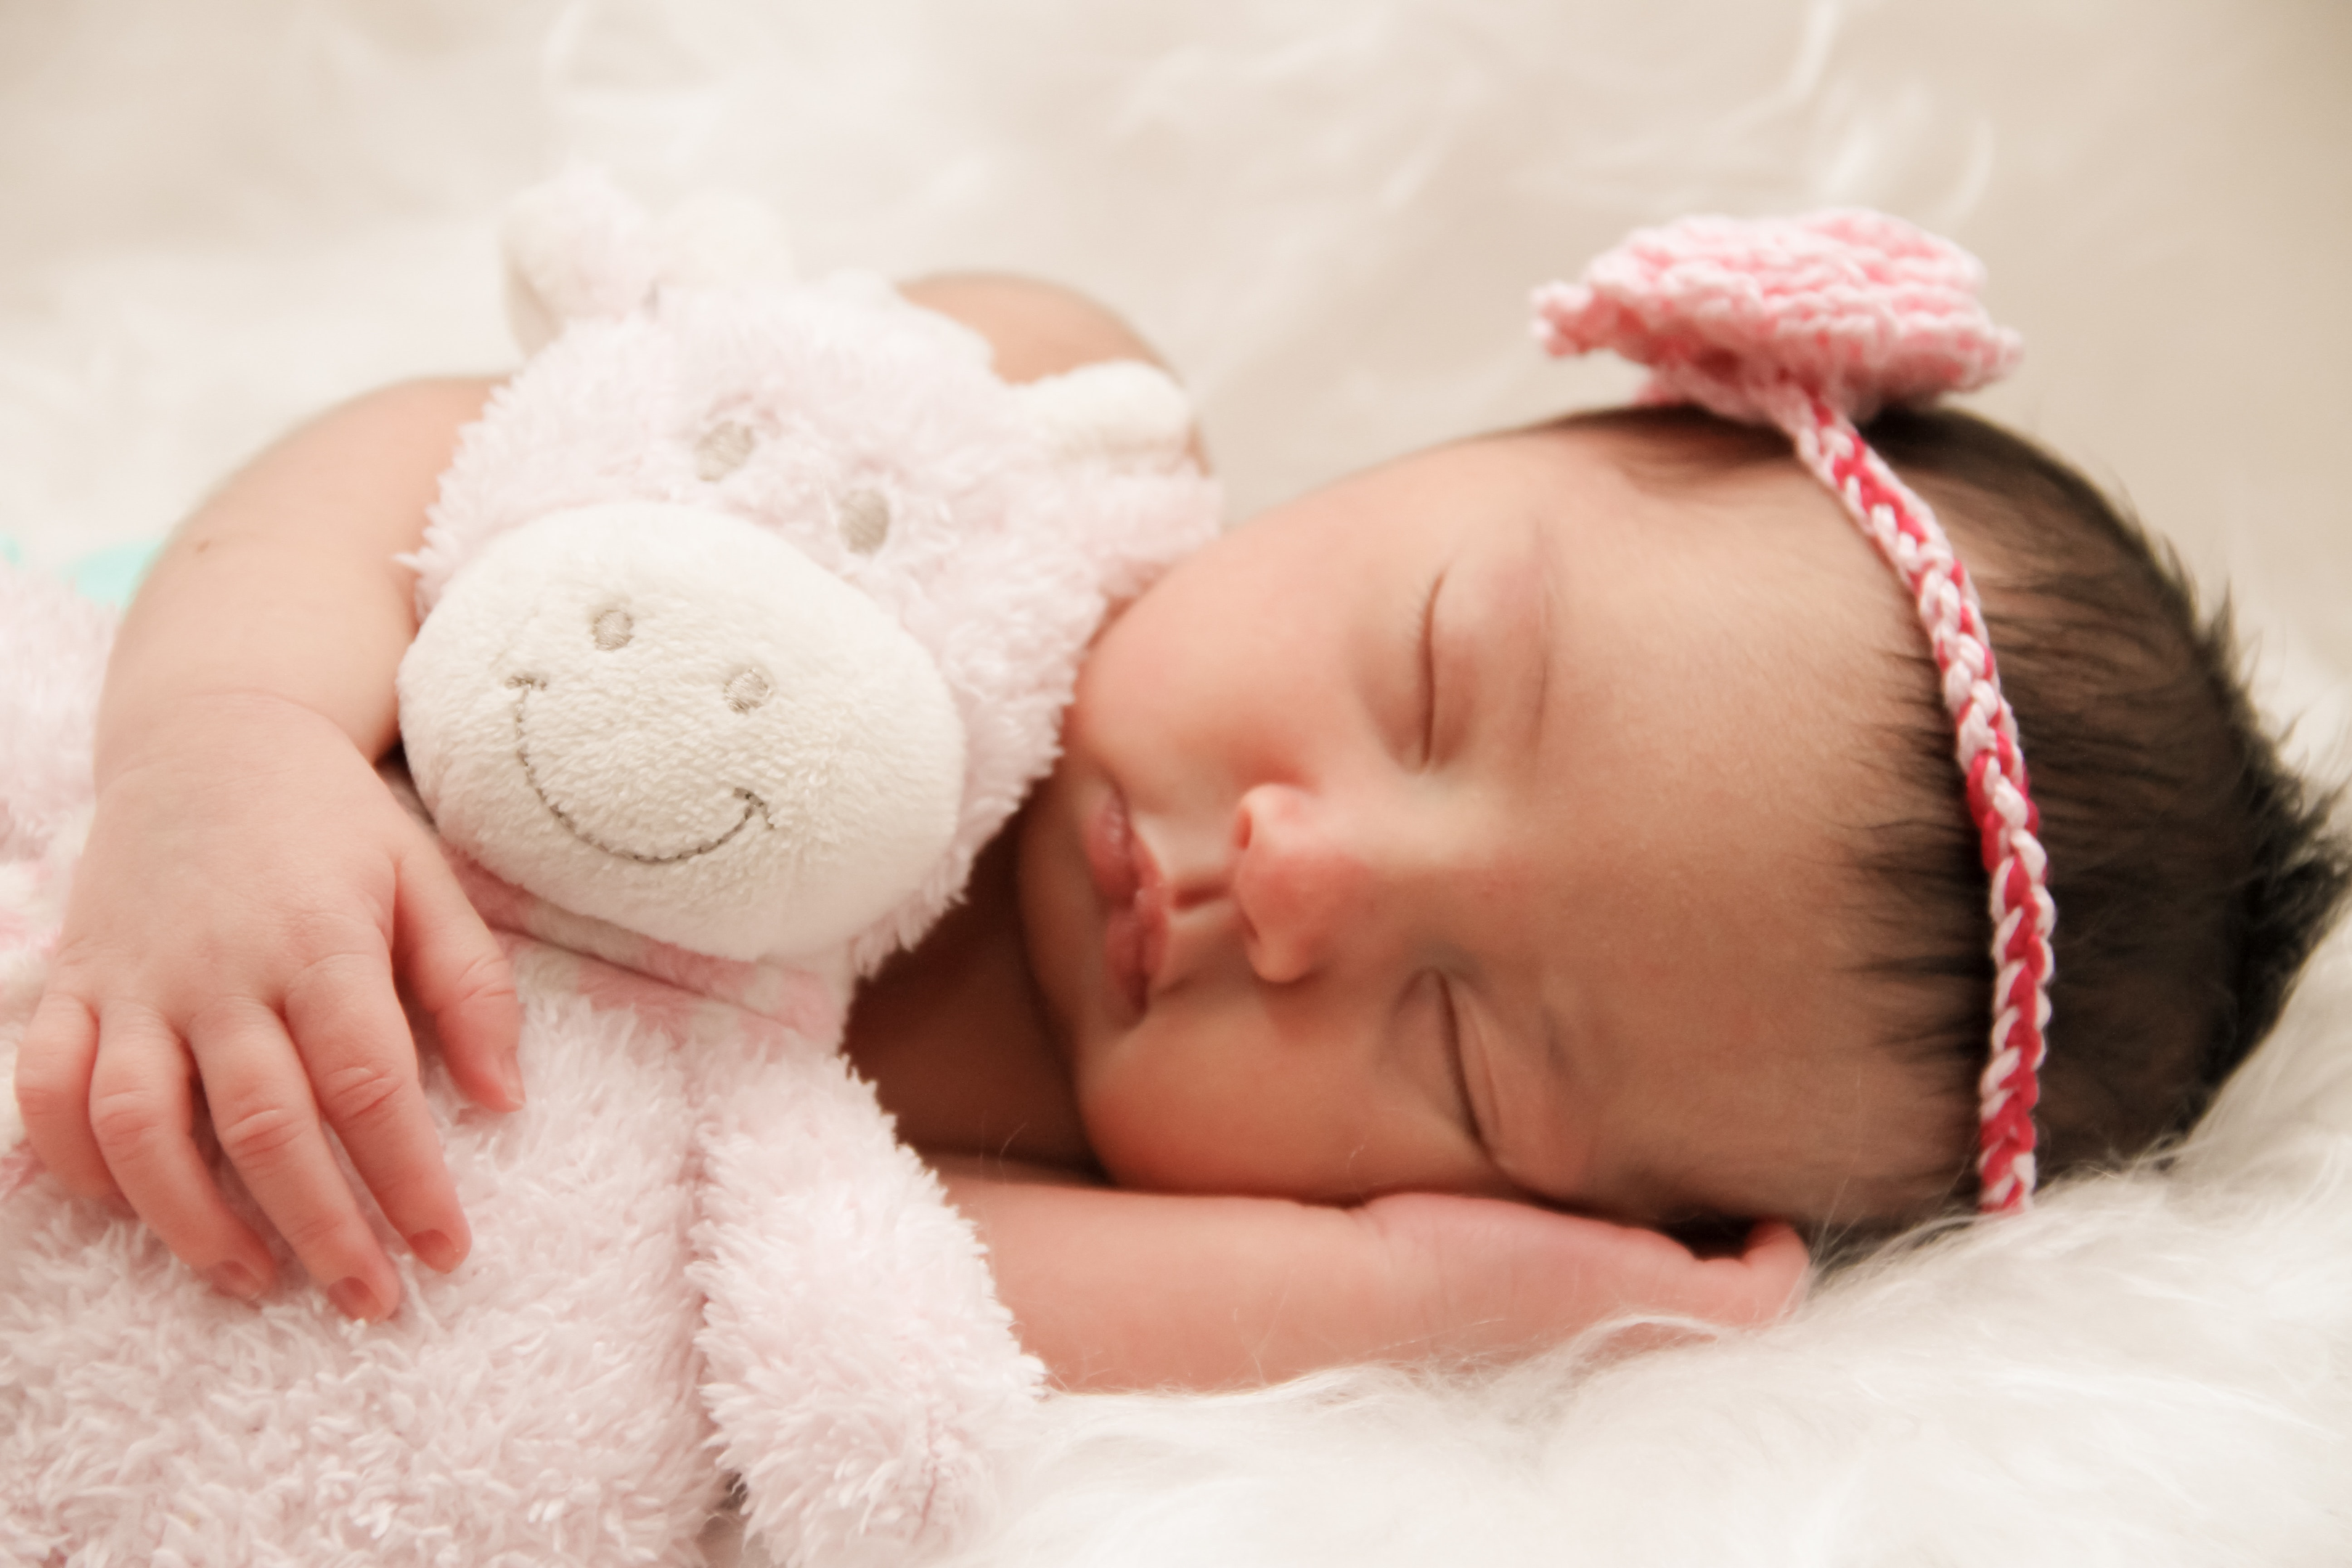 should i consider chiropractic care for my baby?